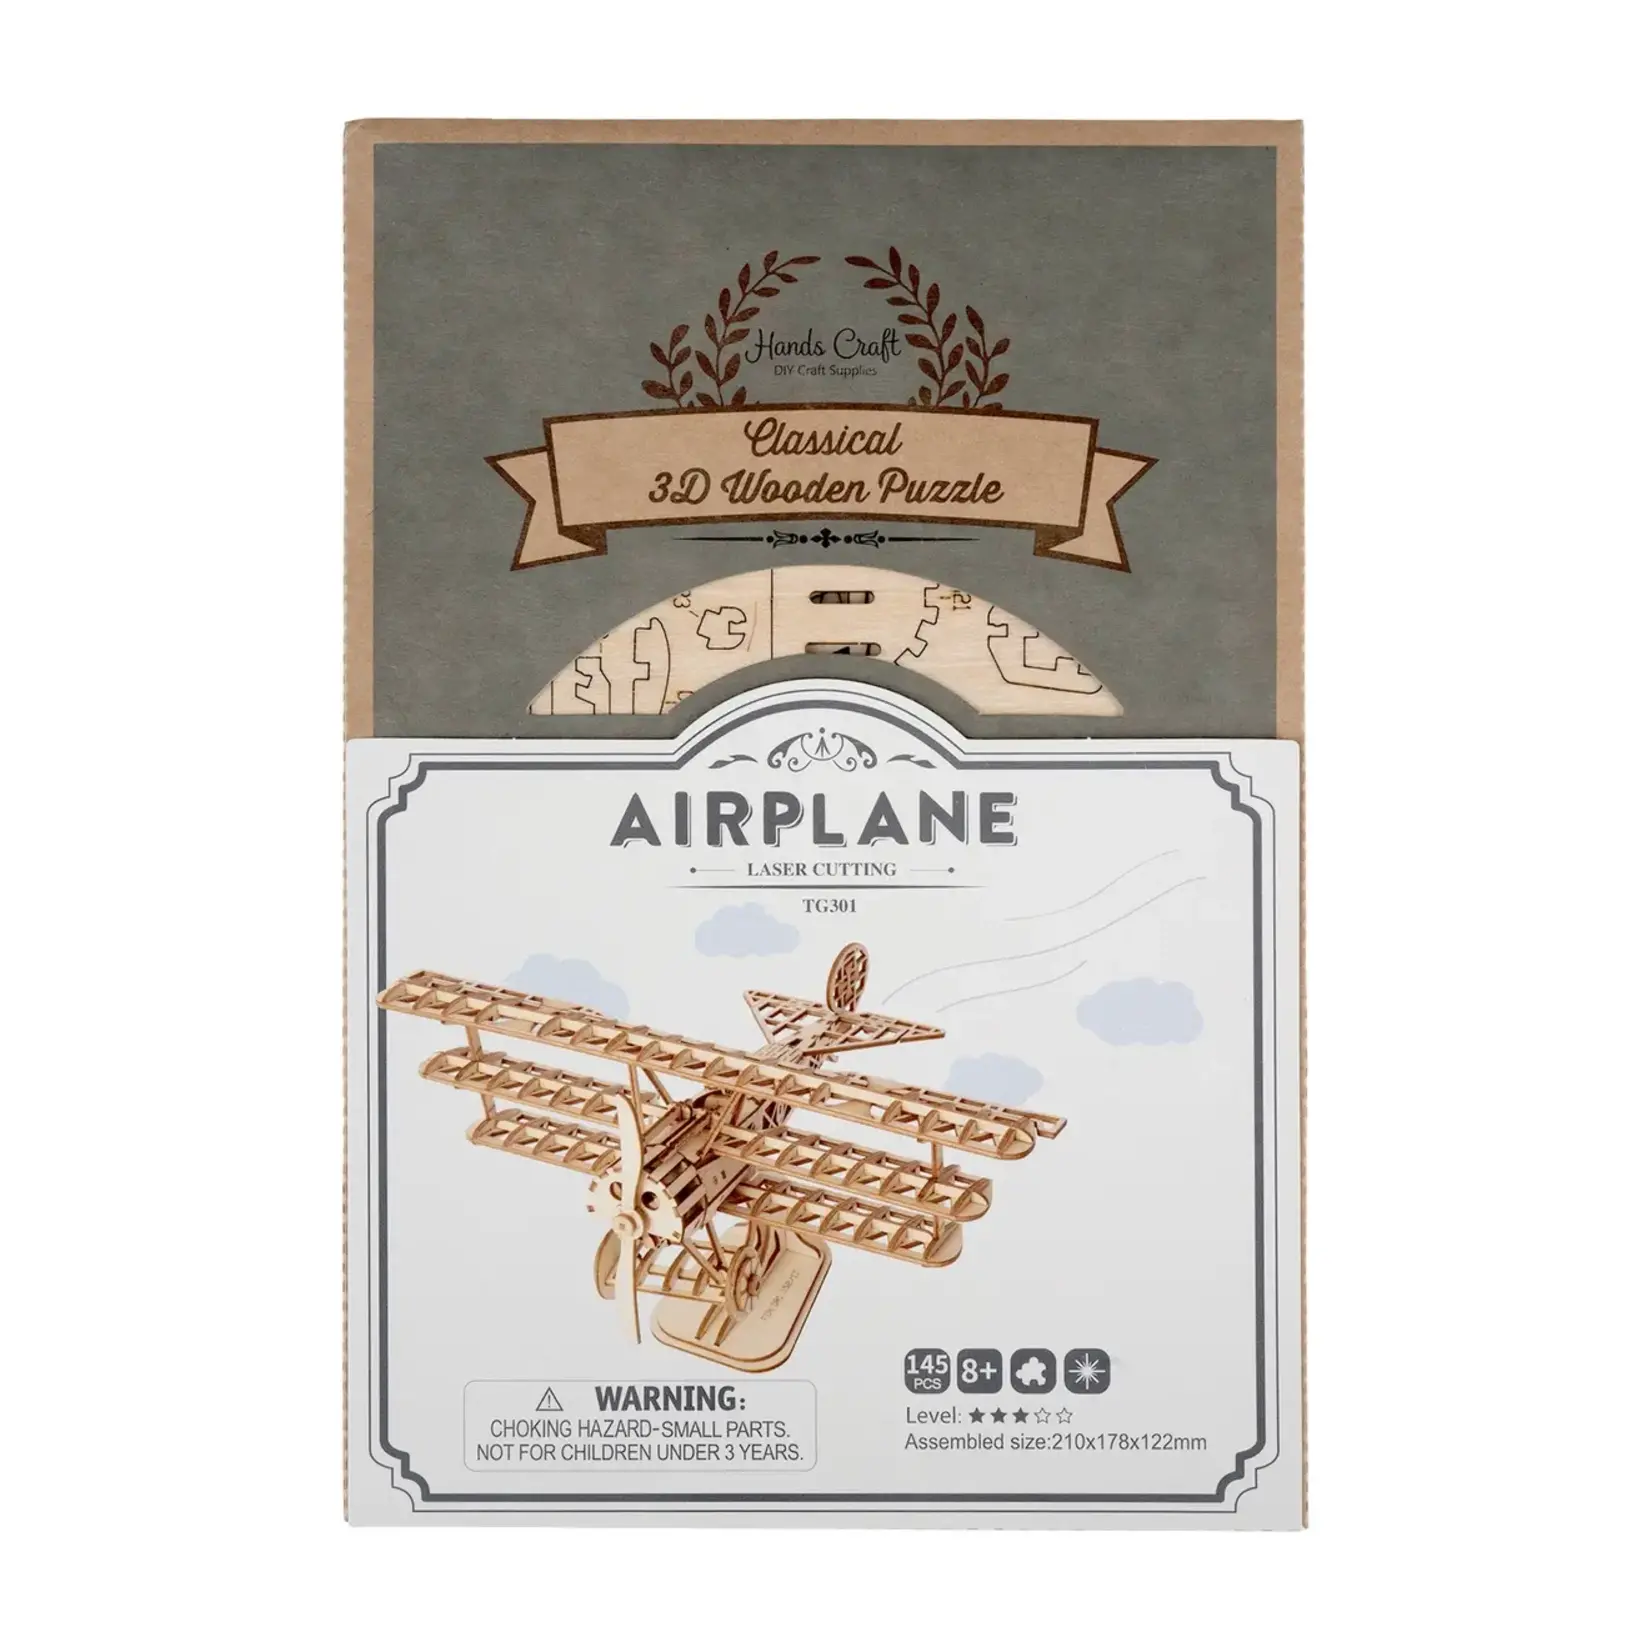 TG301, 3D Wooden Puzzle: Airplane